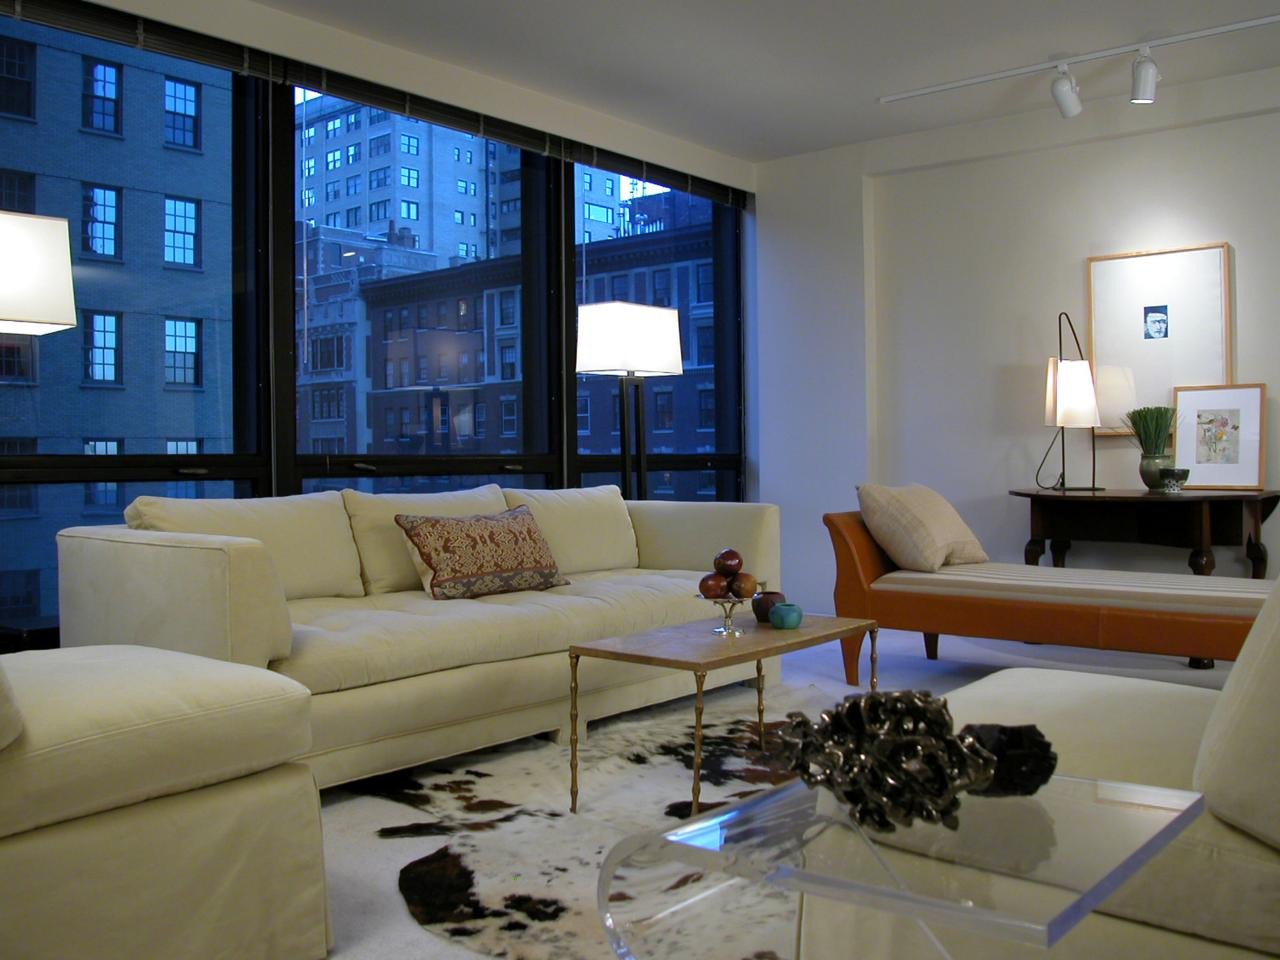 Contemporary Living Room Lamps Beautiful Lighting Tips for Every Room